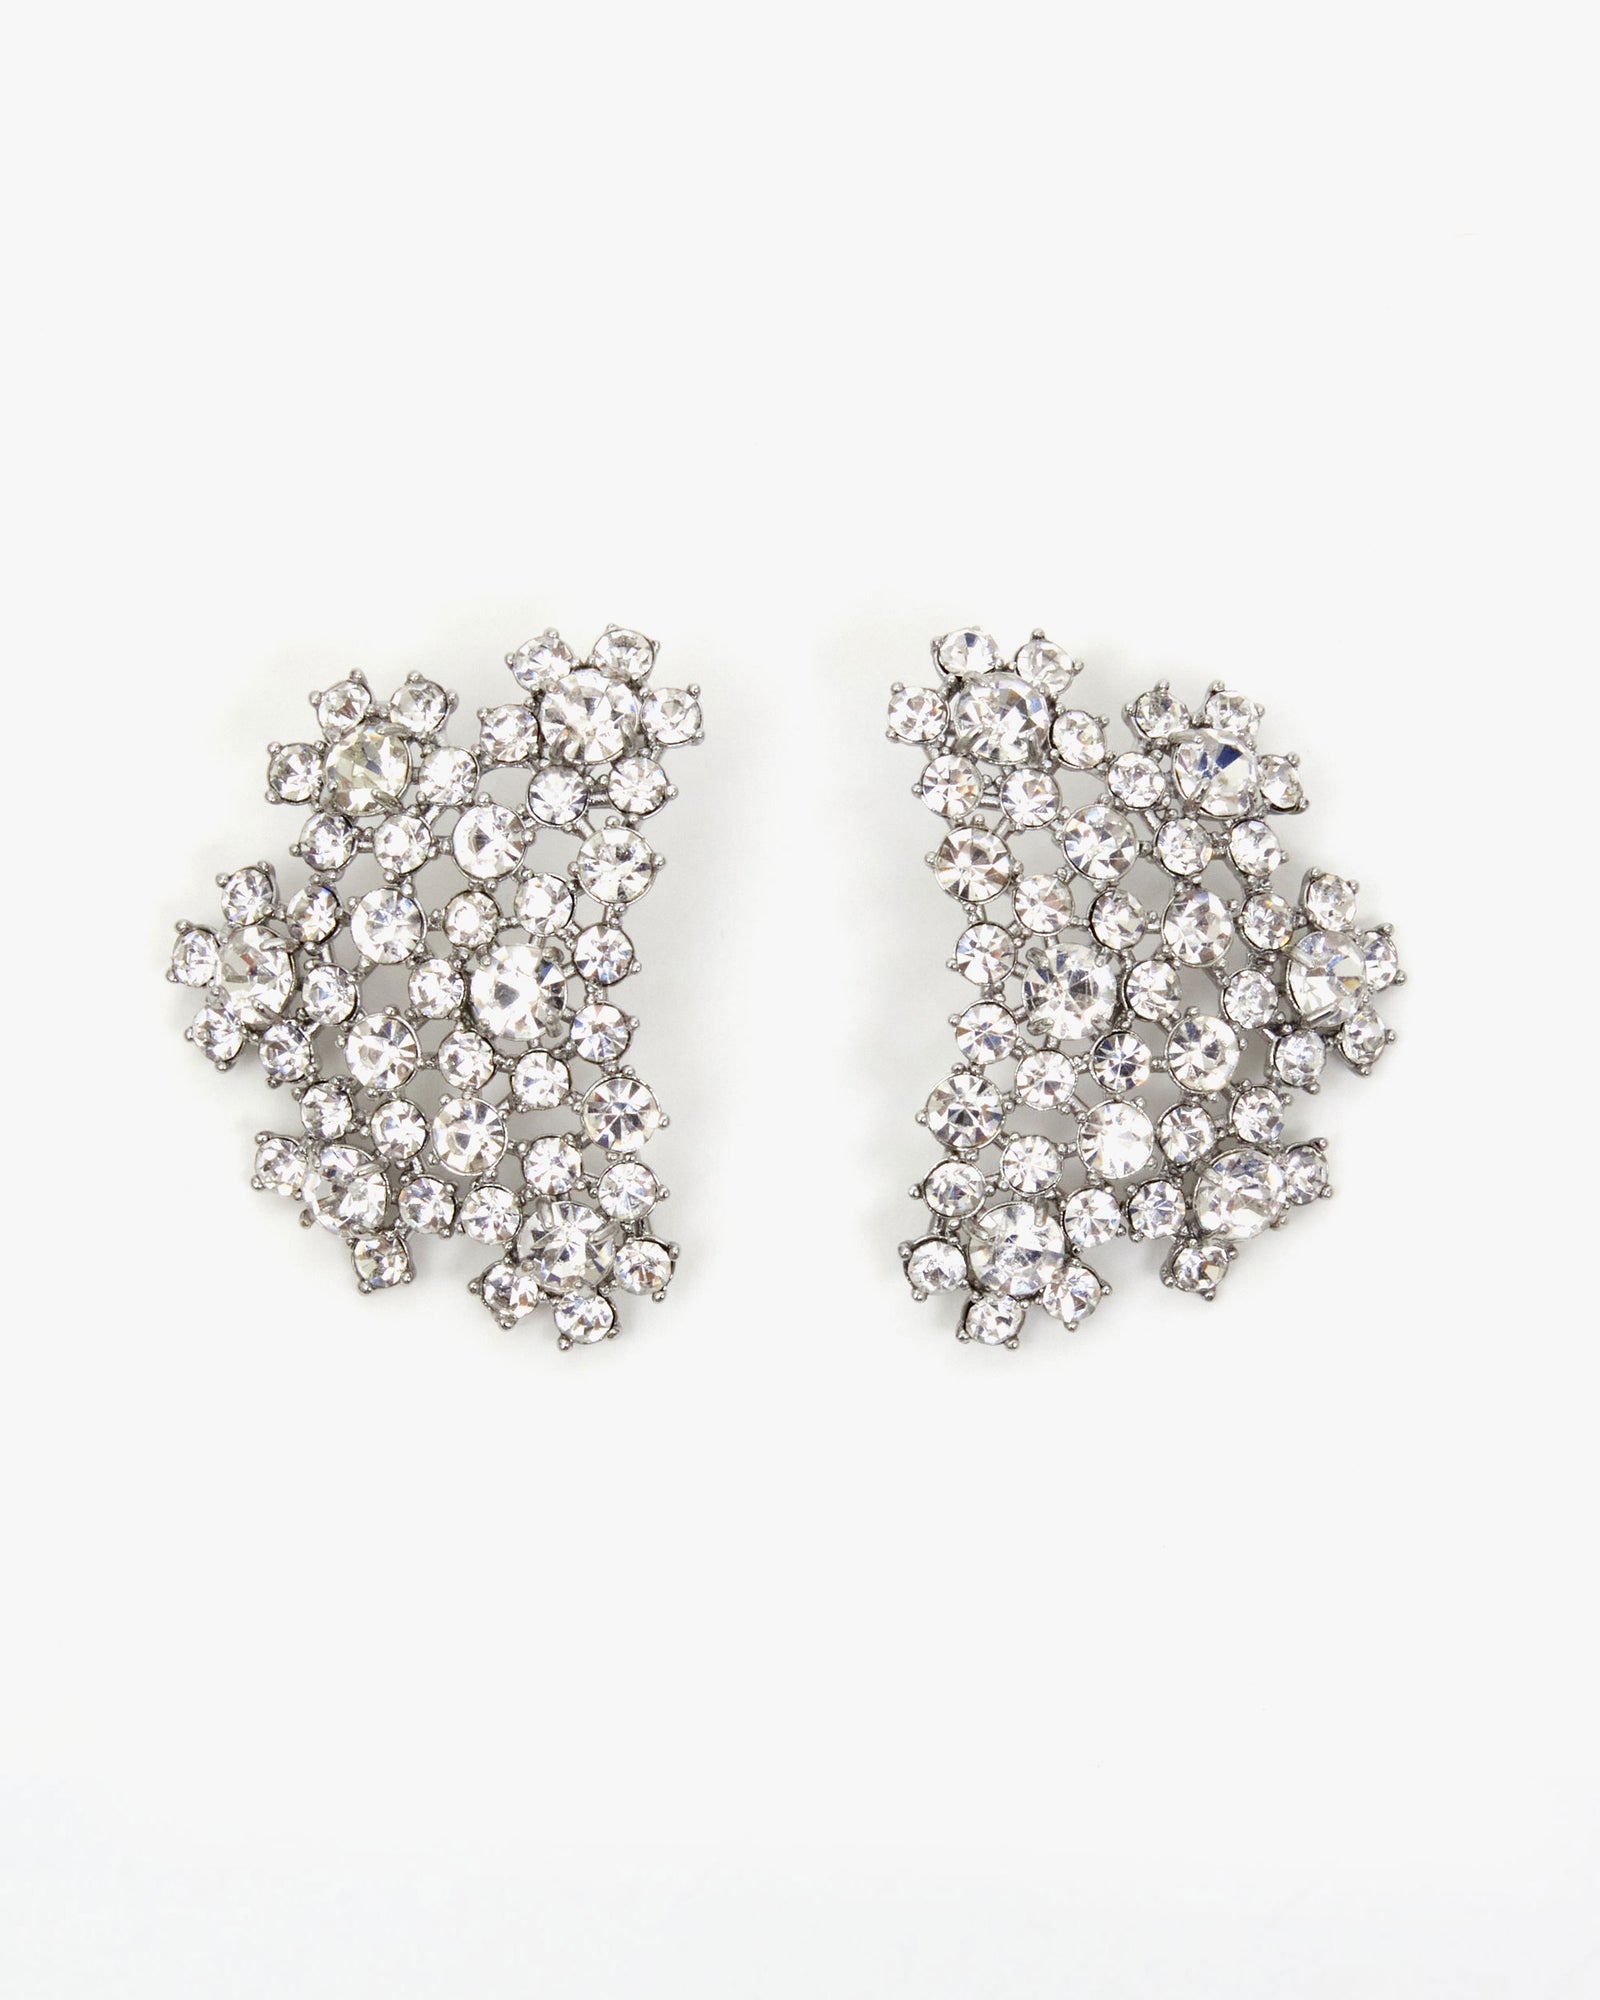 Clear and Shiny Rhodium Finish Encrusted Statement Studs